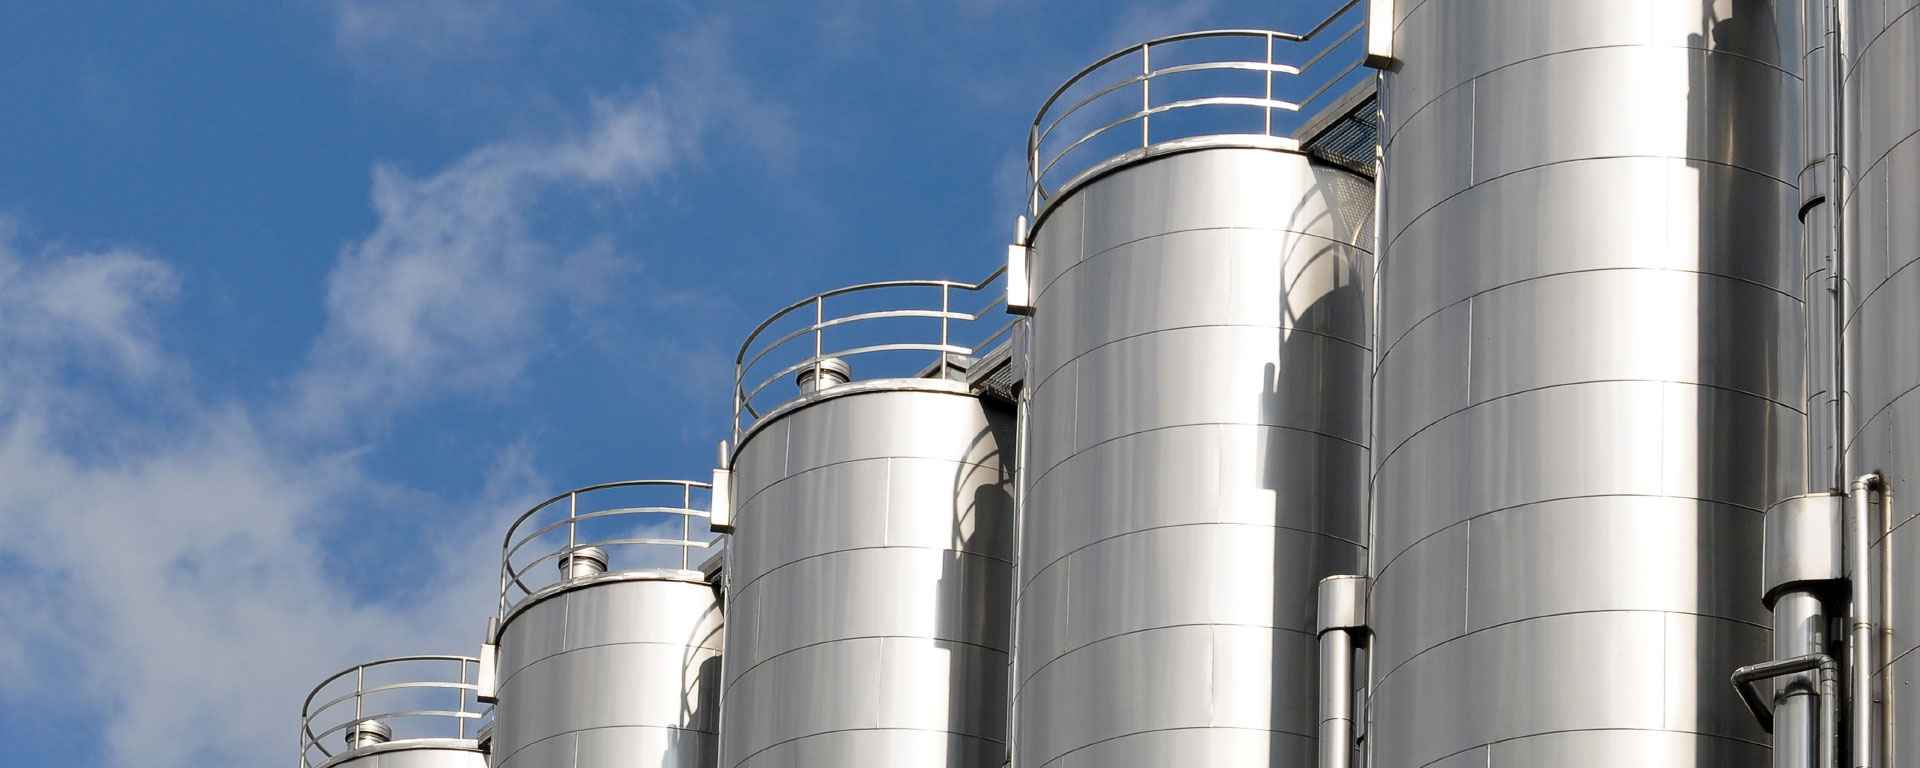 A row of staggered silos with blue sky in the background